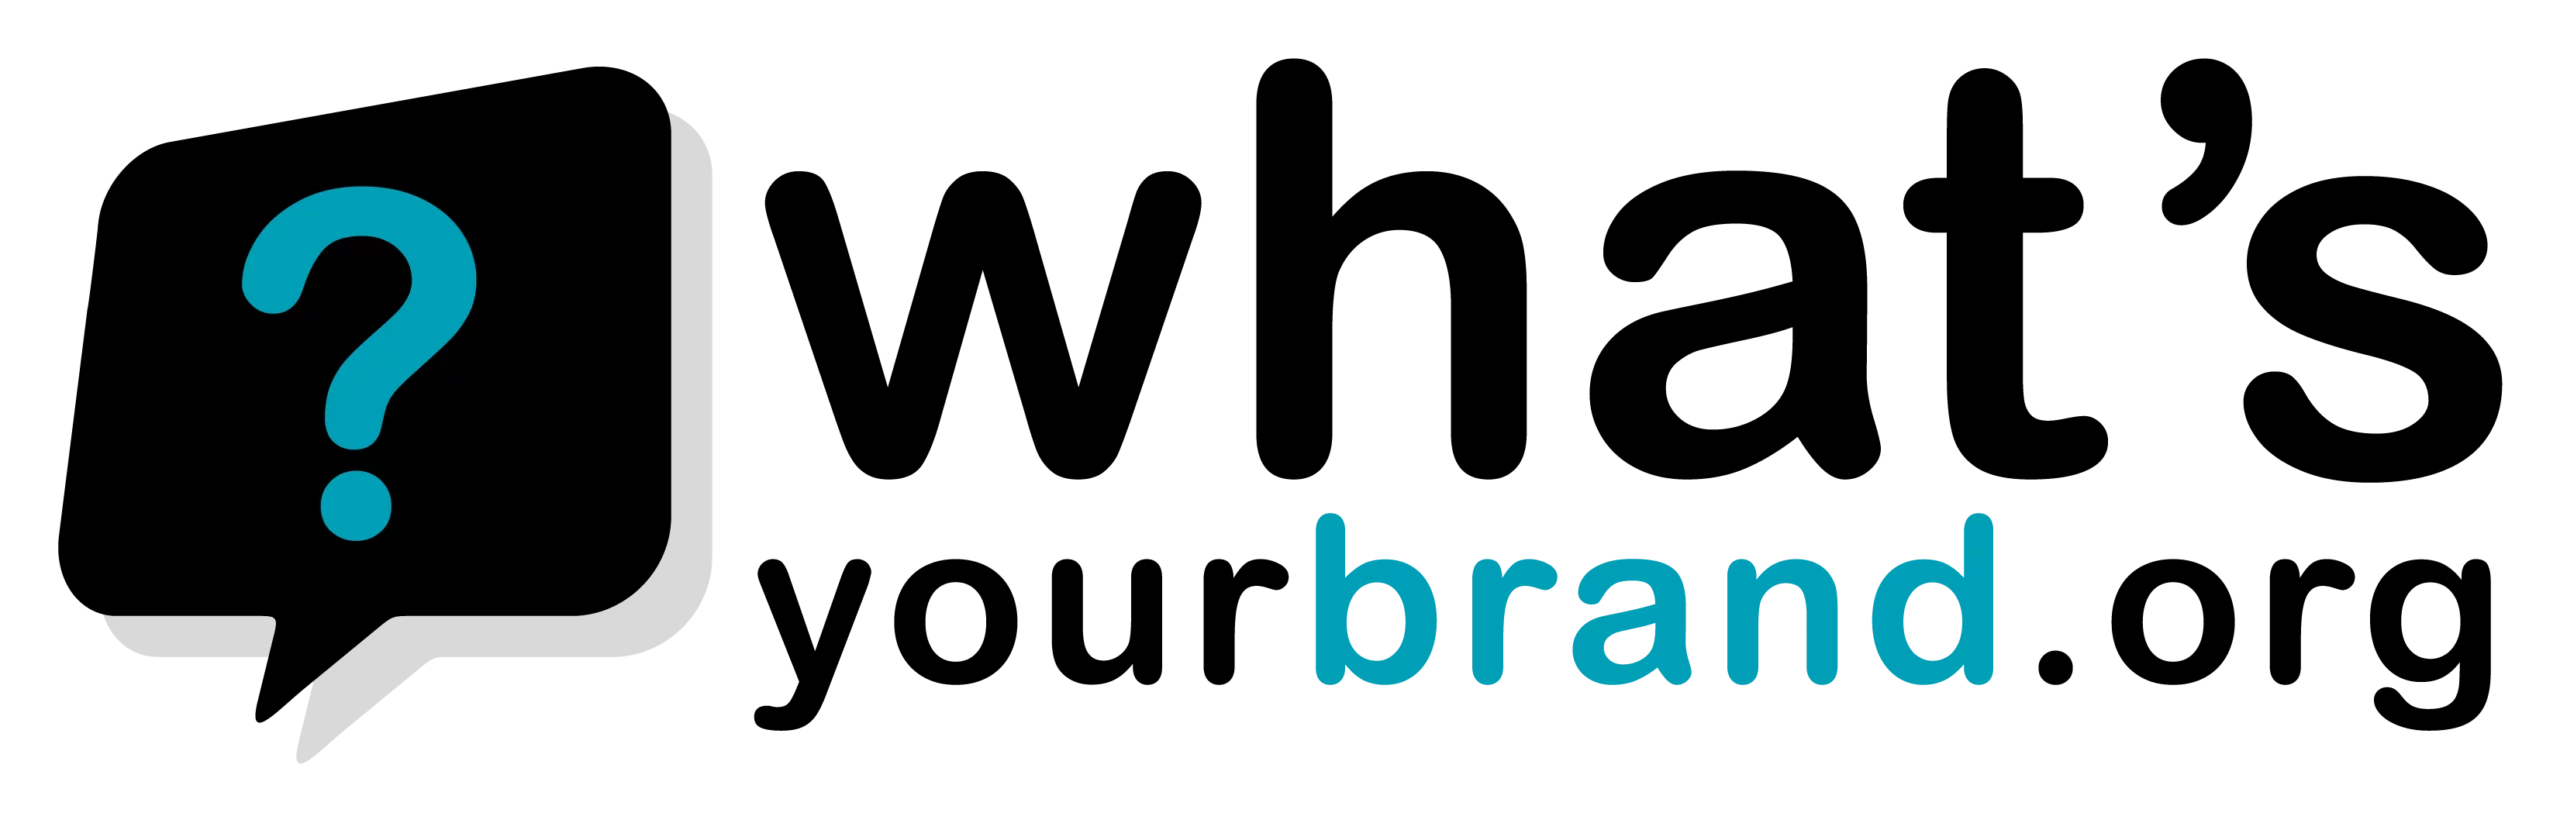 What's Your Brand? logo (teal question mark in a black stylized speech bubble and whatsyourbrand.org as text)